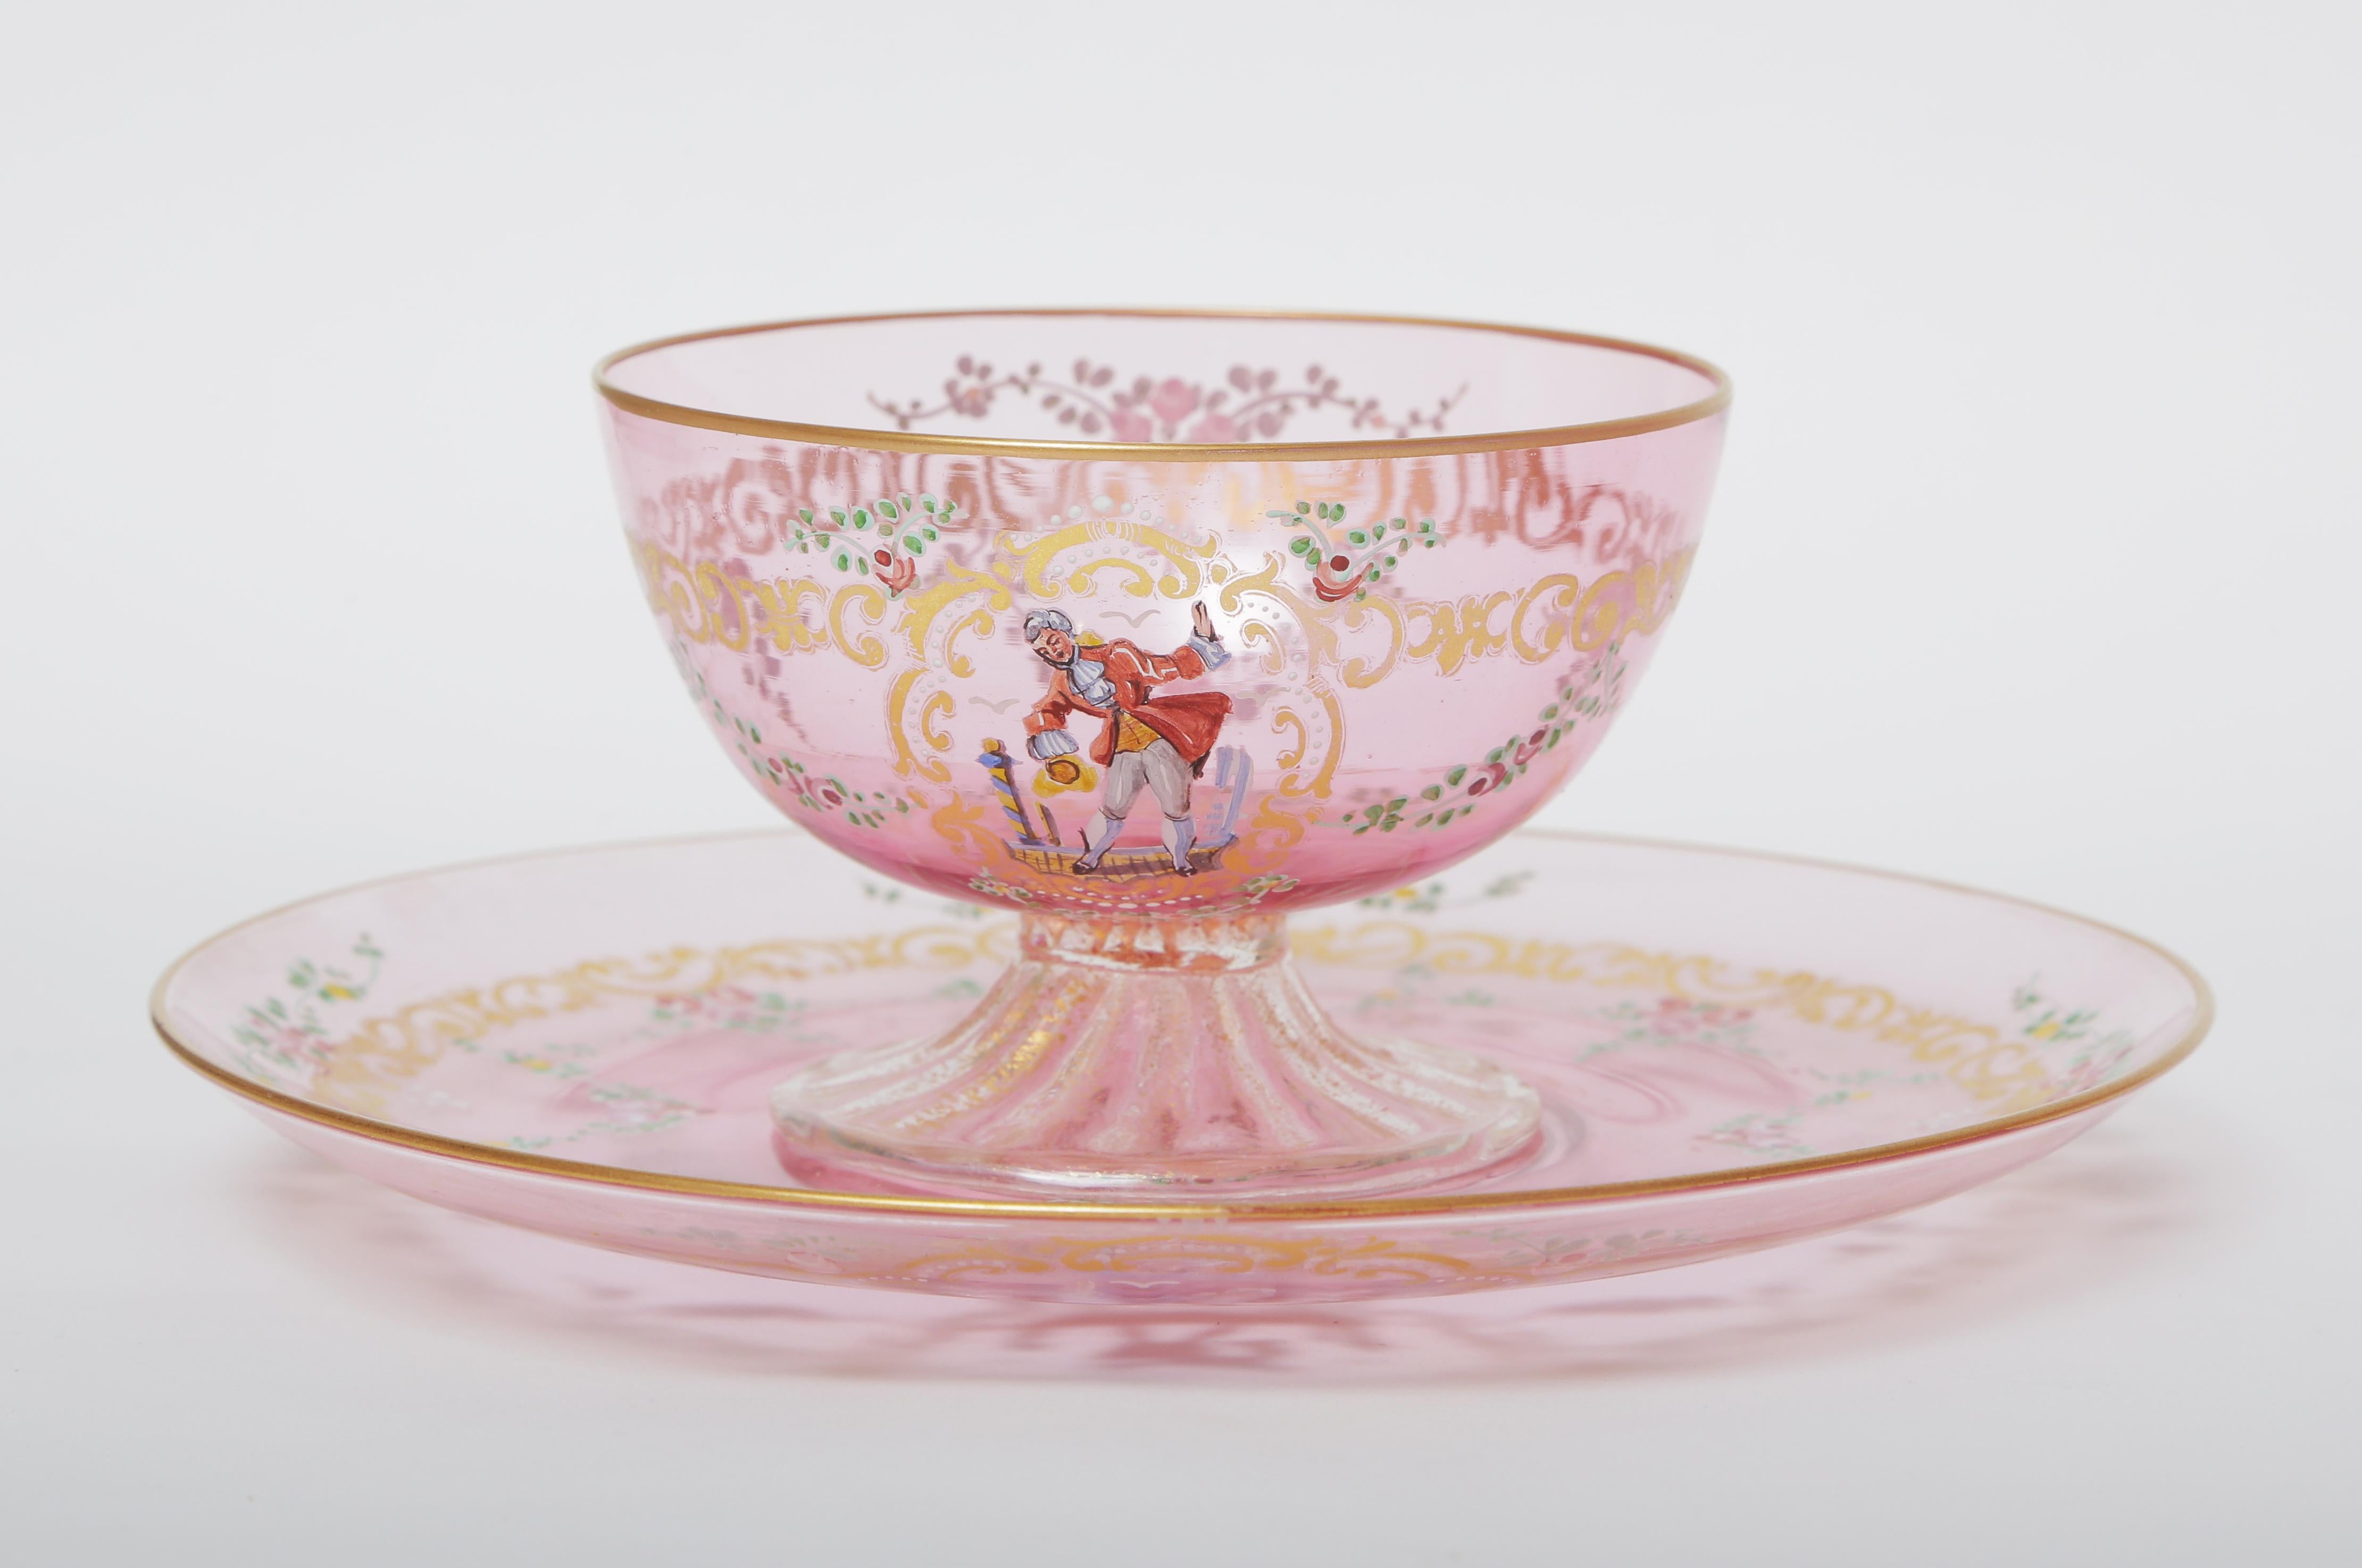 An exquisite set of 11 dessert coupes and 11 matching dessert under plates in a pretty pink color. These lovely pieces feature hand enameled figural and floral details with a gilt foliate swag. We love the shape of the bowl and how nicely it sits on